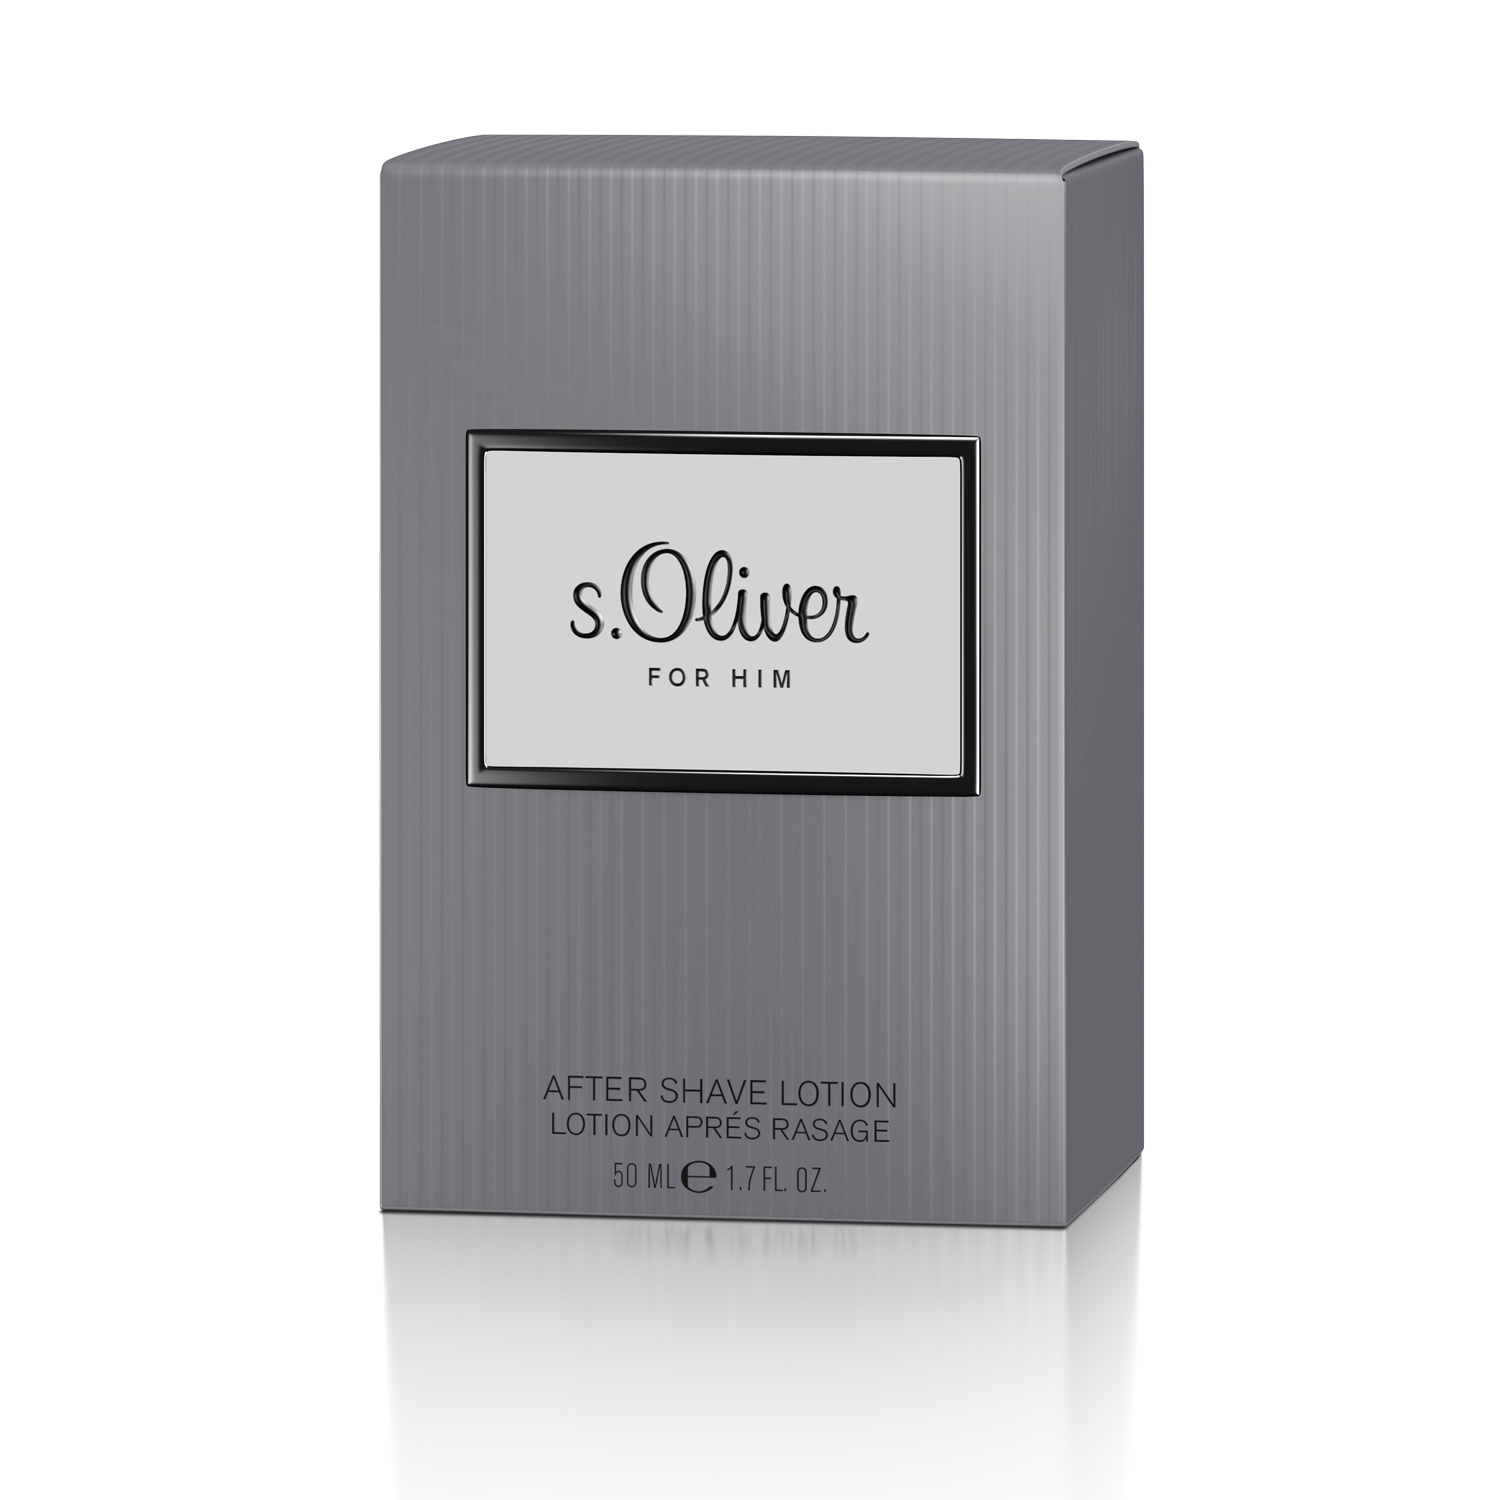 S.Oliver for Him After Shave Lotion 50ml